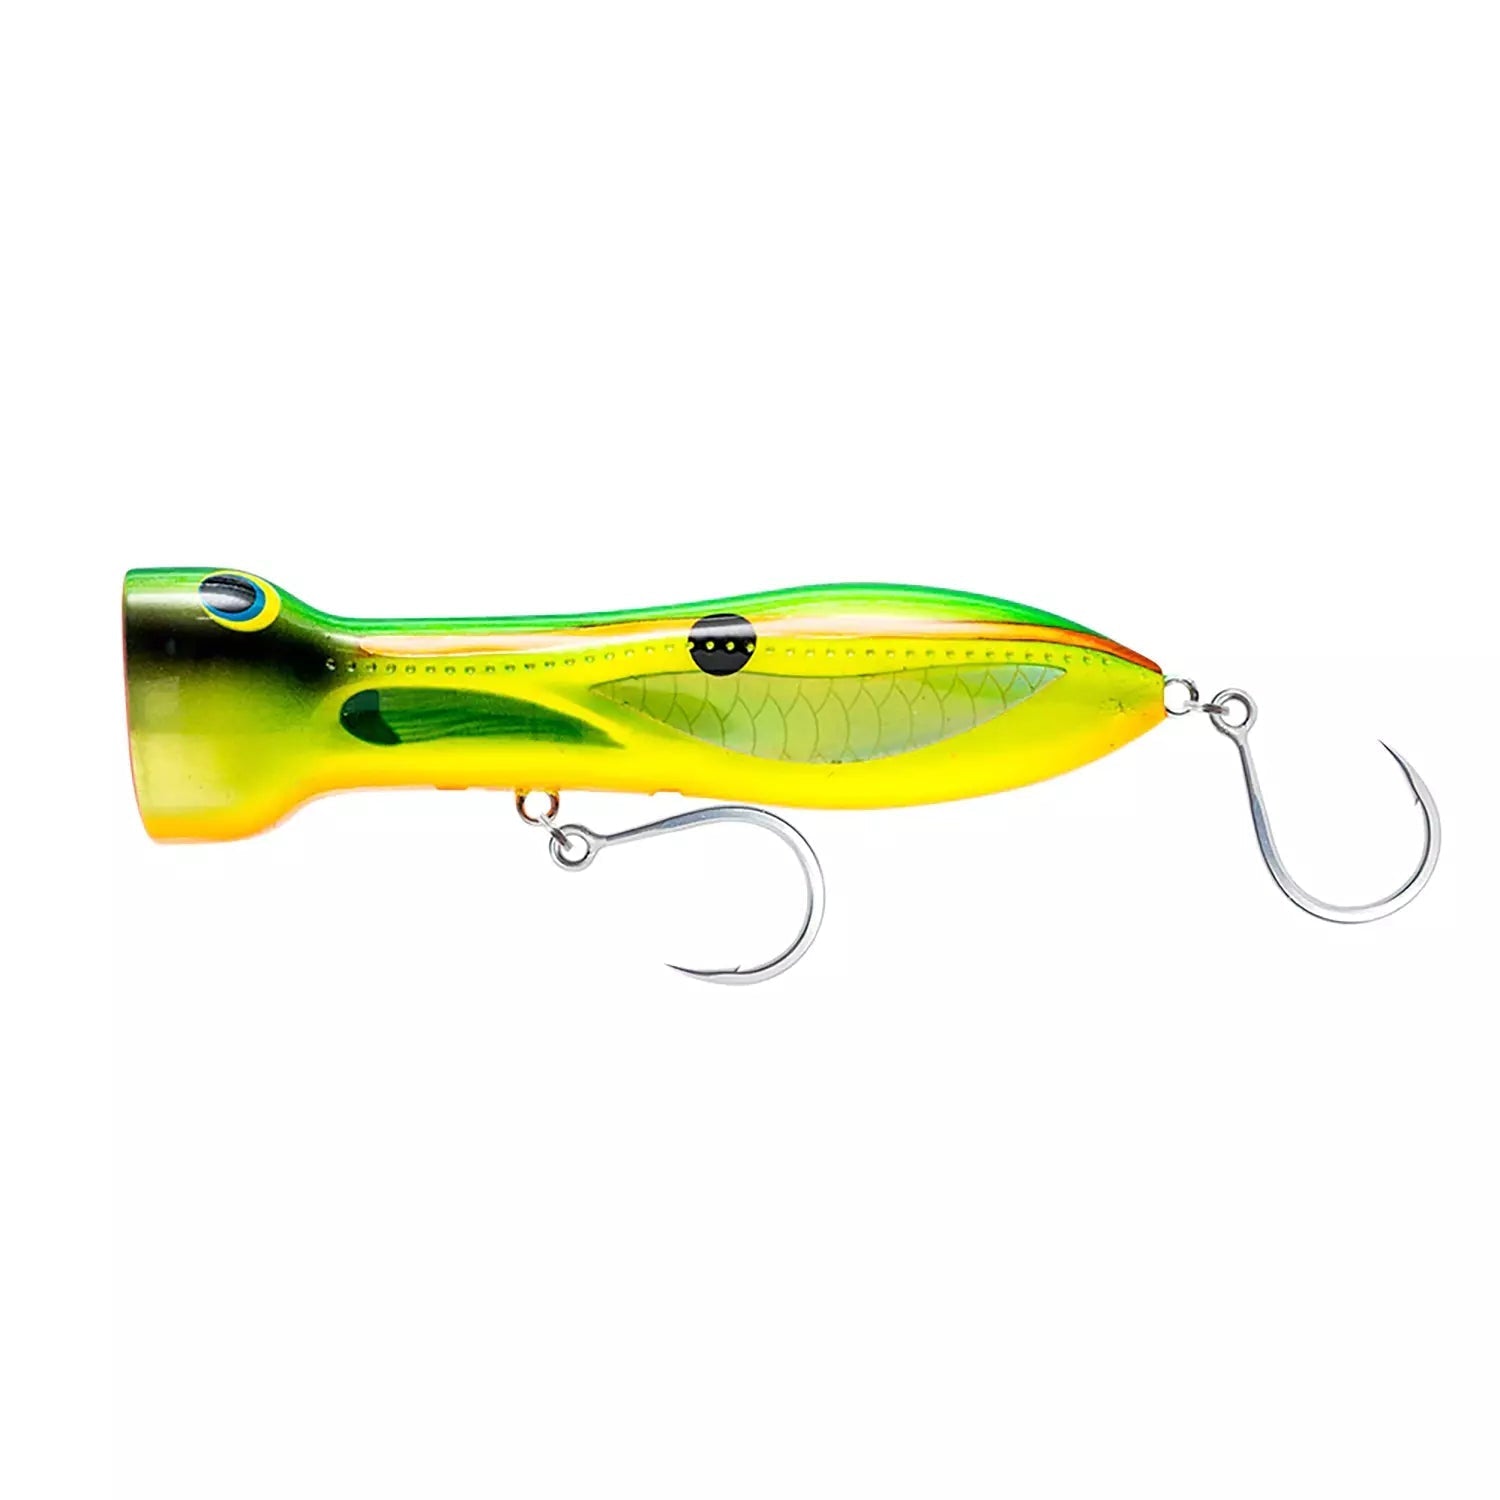 Nomad Design Chug Norris Popper-Lure - Poppers, Stickbaits & Pencils-Nomad-150mm-Calypso-Fishing Station